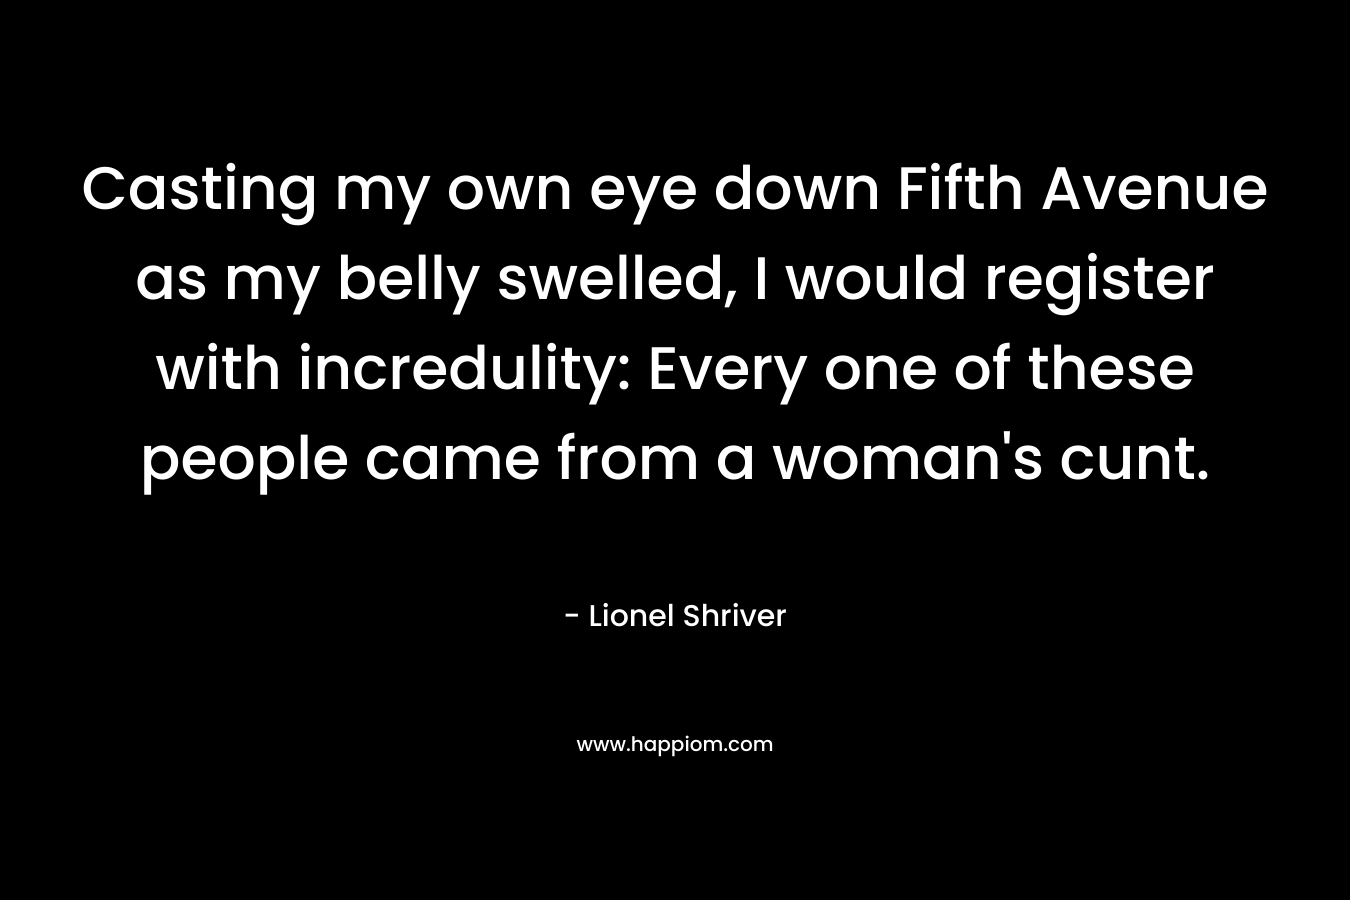 Casting my own eye down Fifth Avenue as my belly swelled, I would register with incredulity: Every one of these people came from a woman’s cunt. – Lionel Shriver